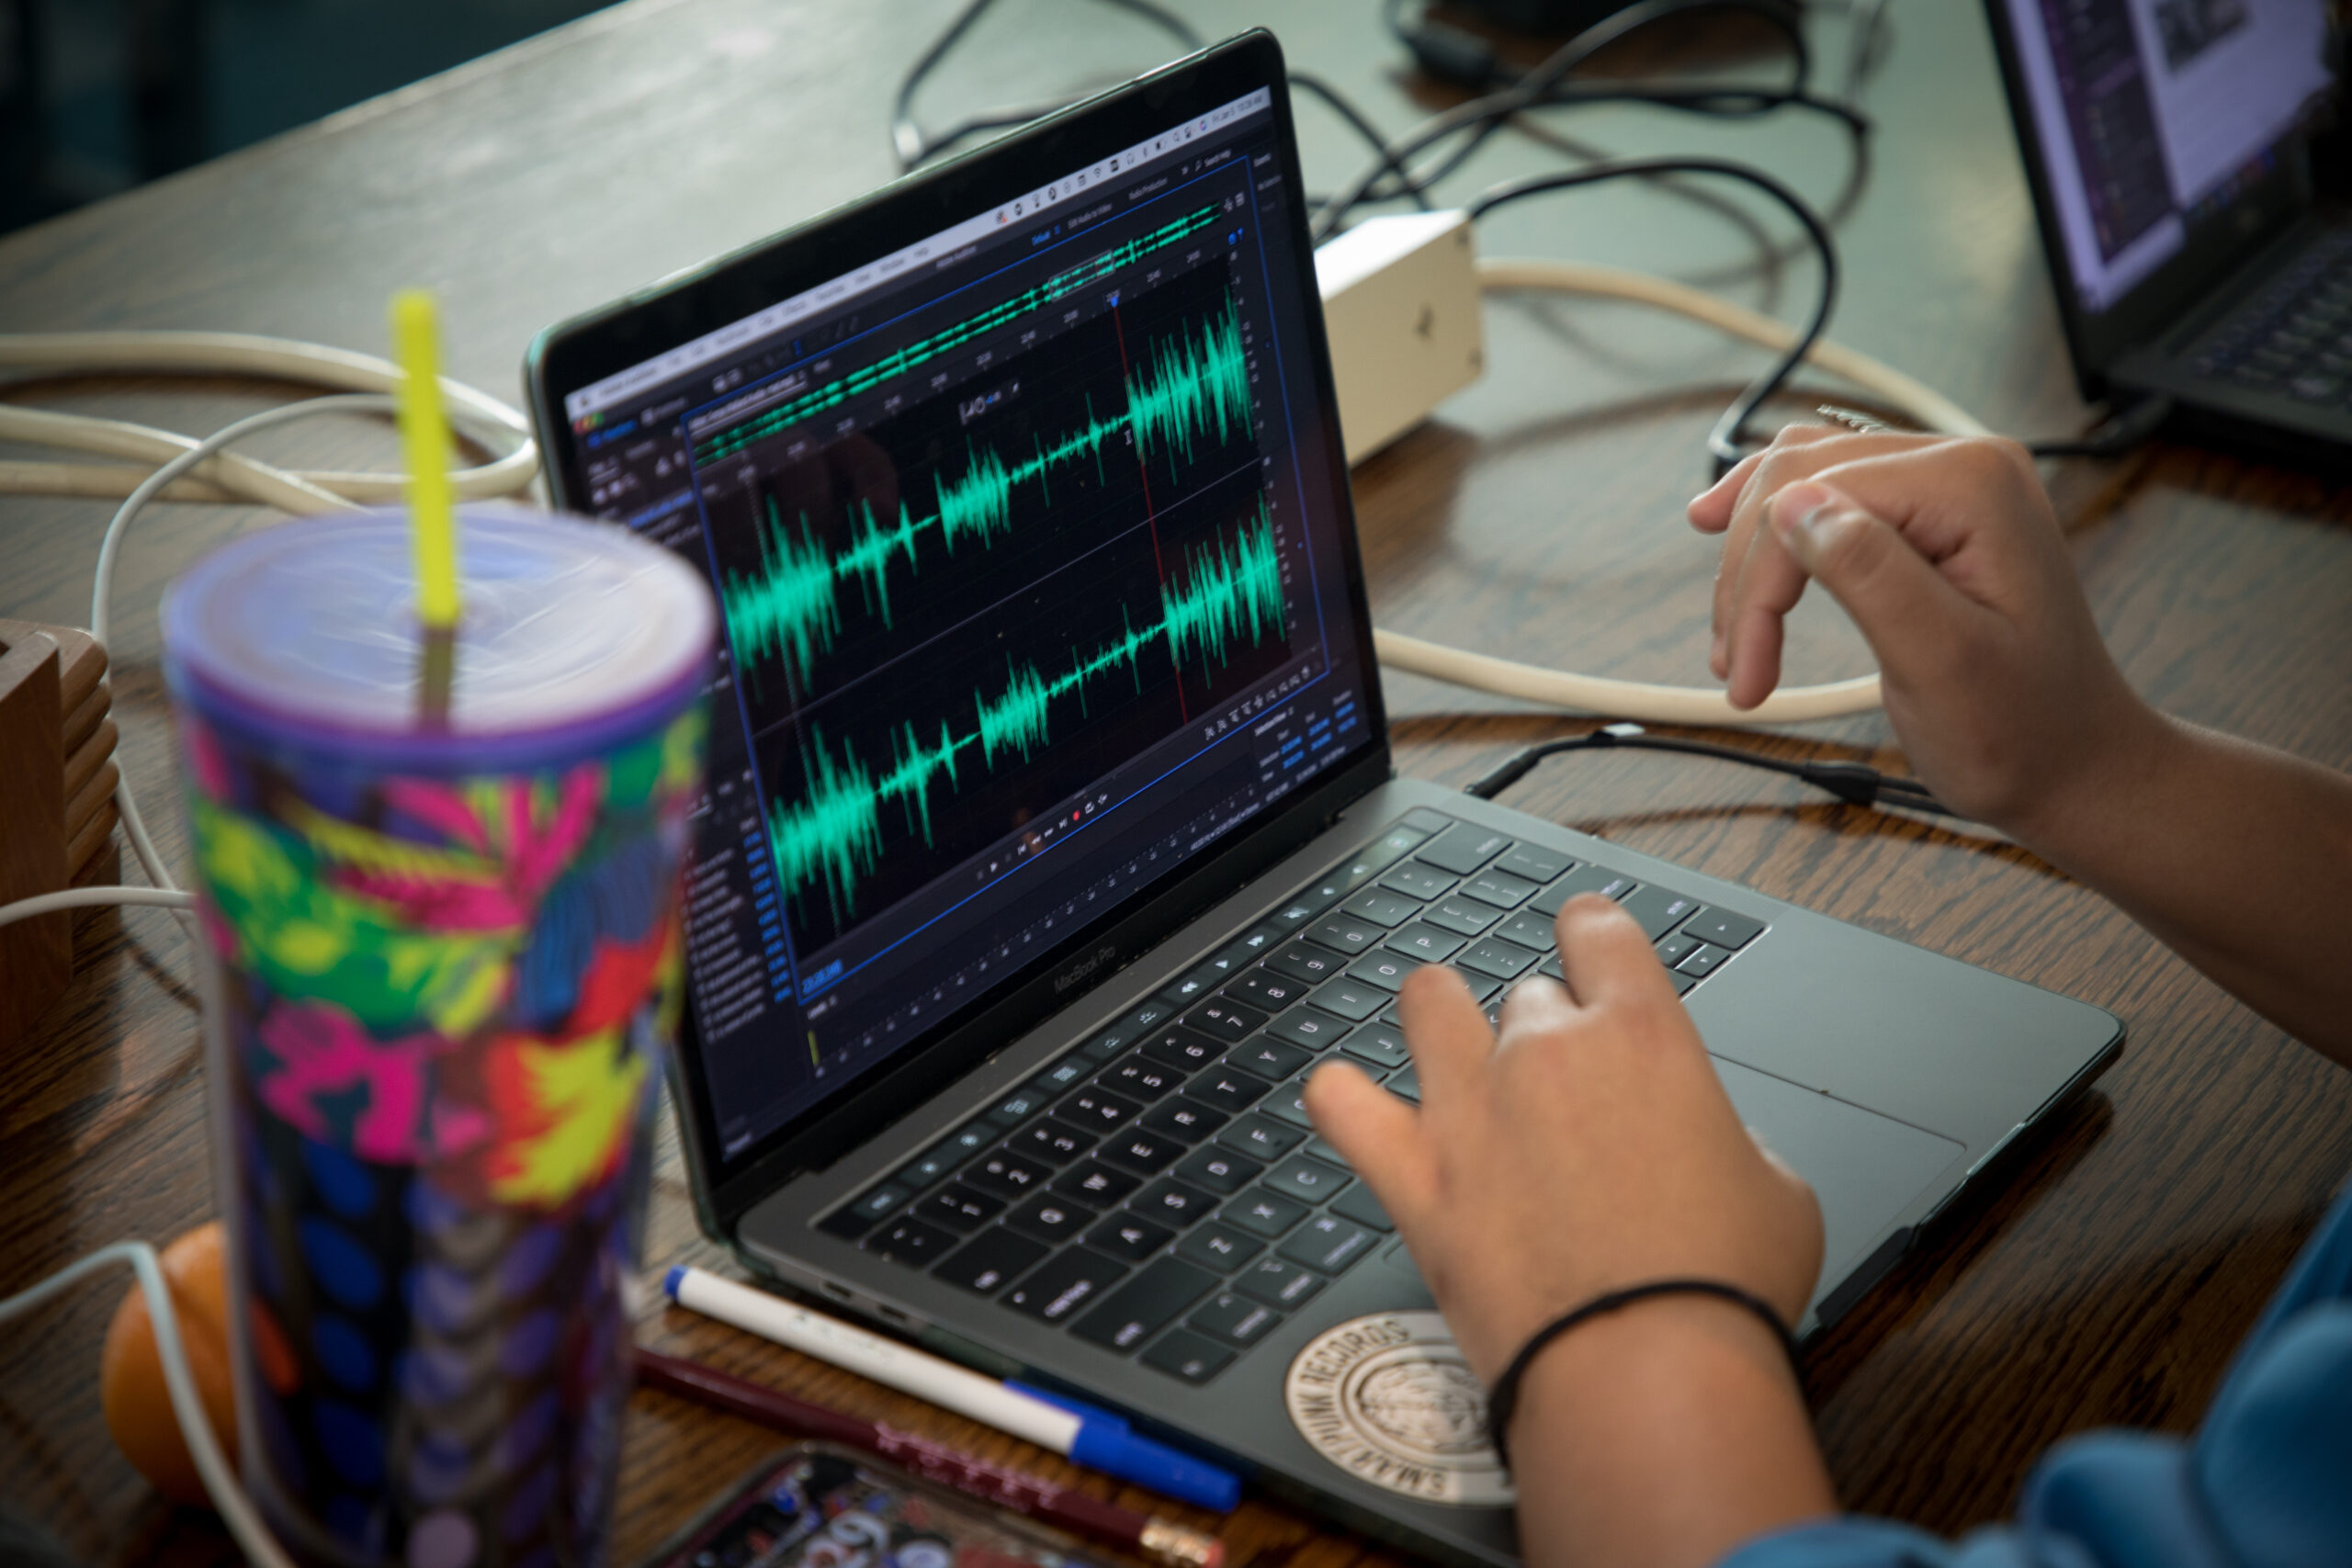 An audio editing application is opened on a laptop with a journalist editing on it. There’s a colorful water bottle to the left of the laptop.